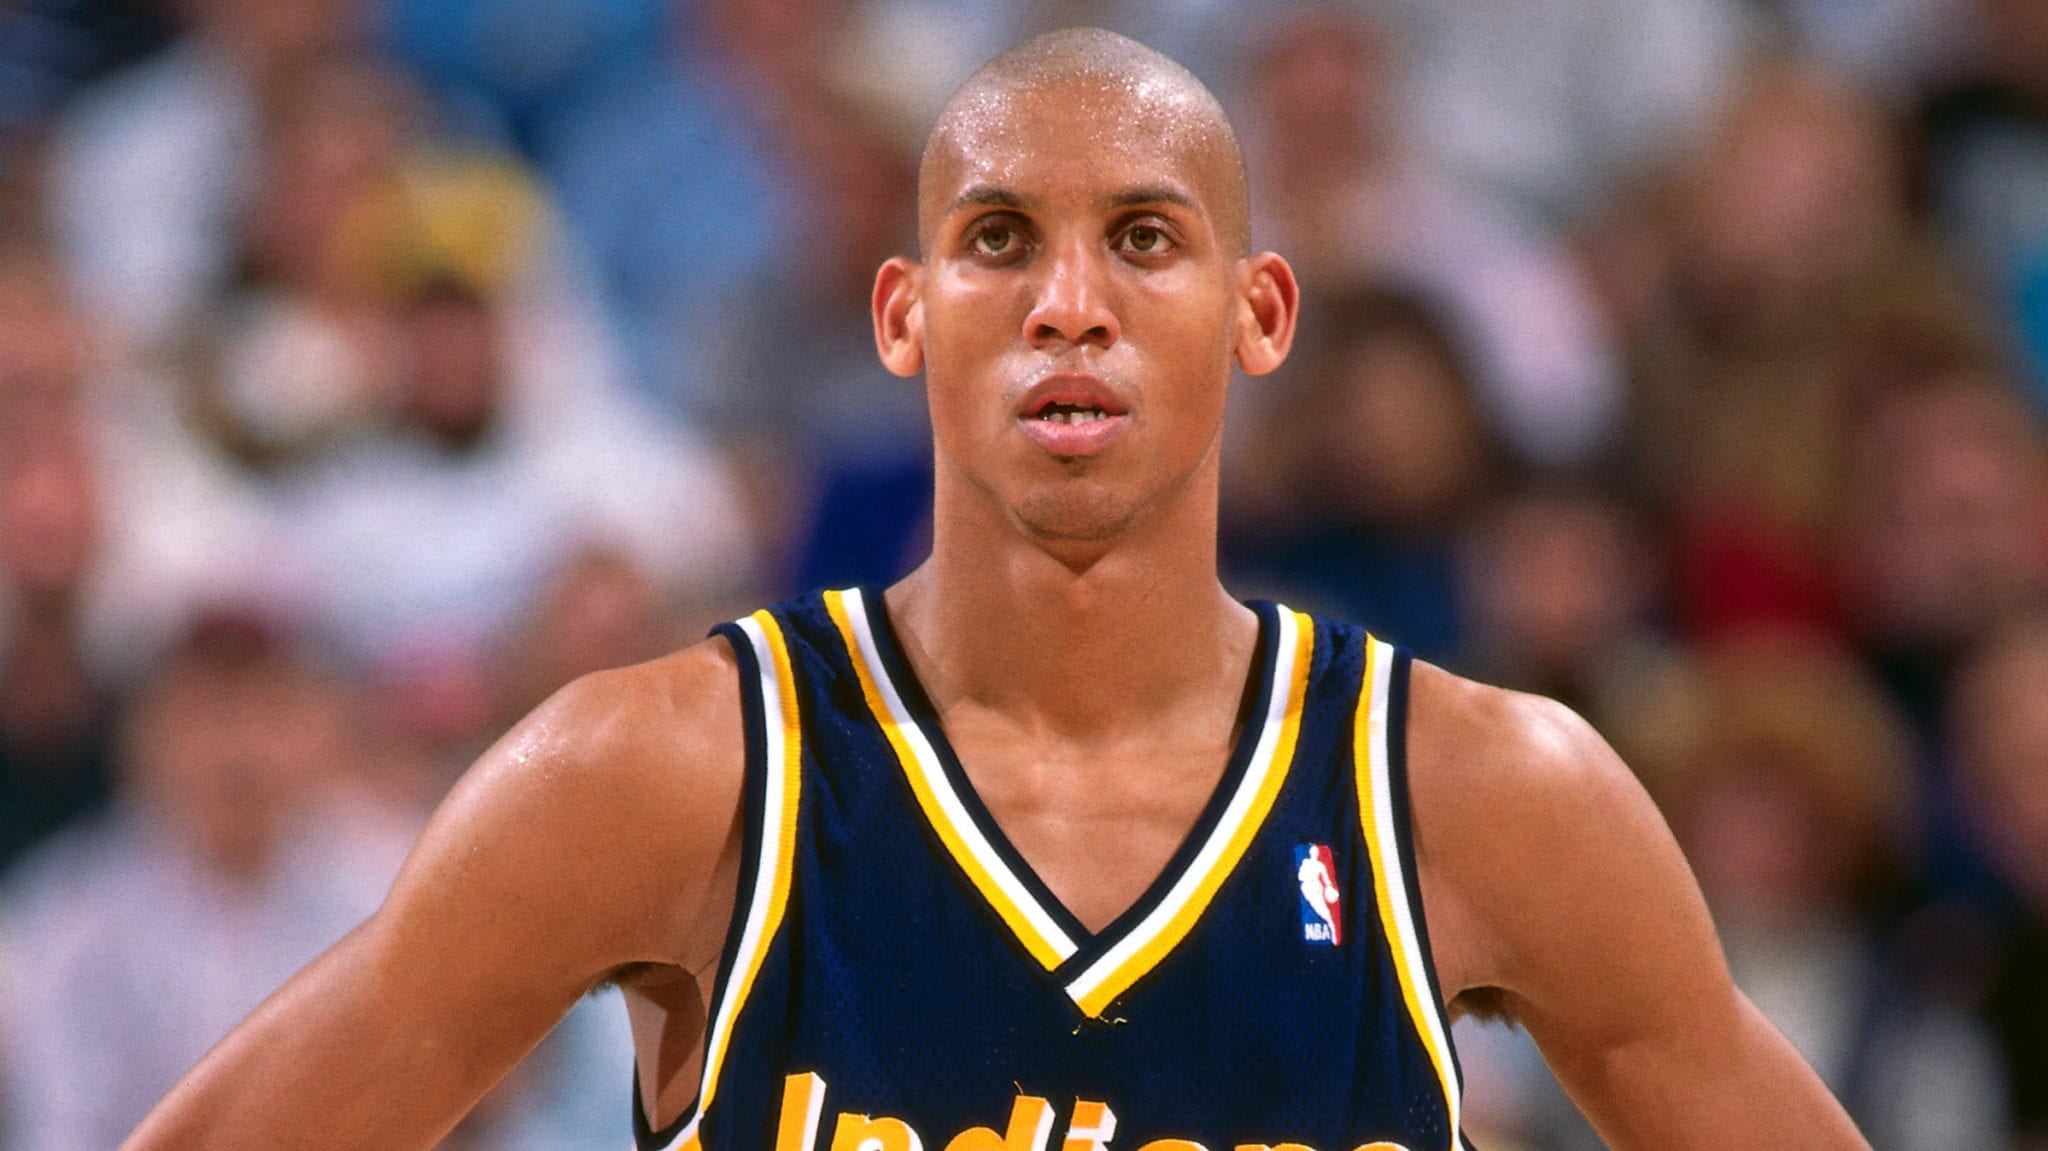 Reggie Miller Almost Rejected ‘The Last Dance’ Due to Painful Memories